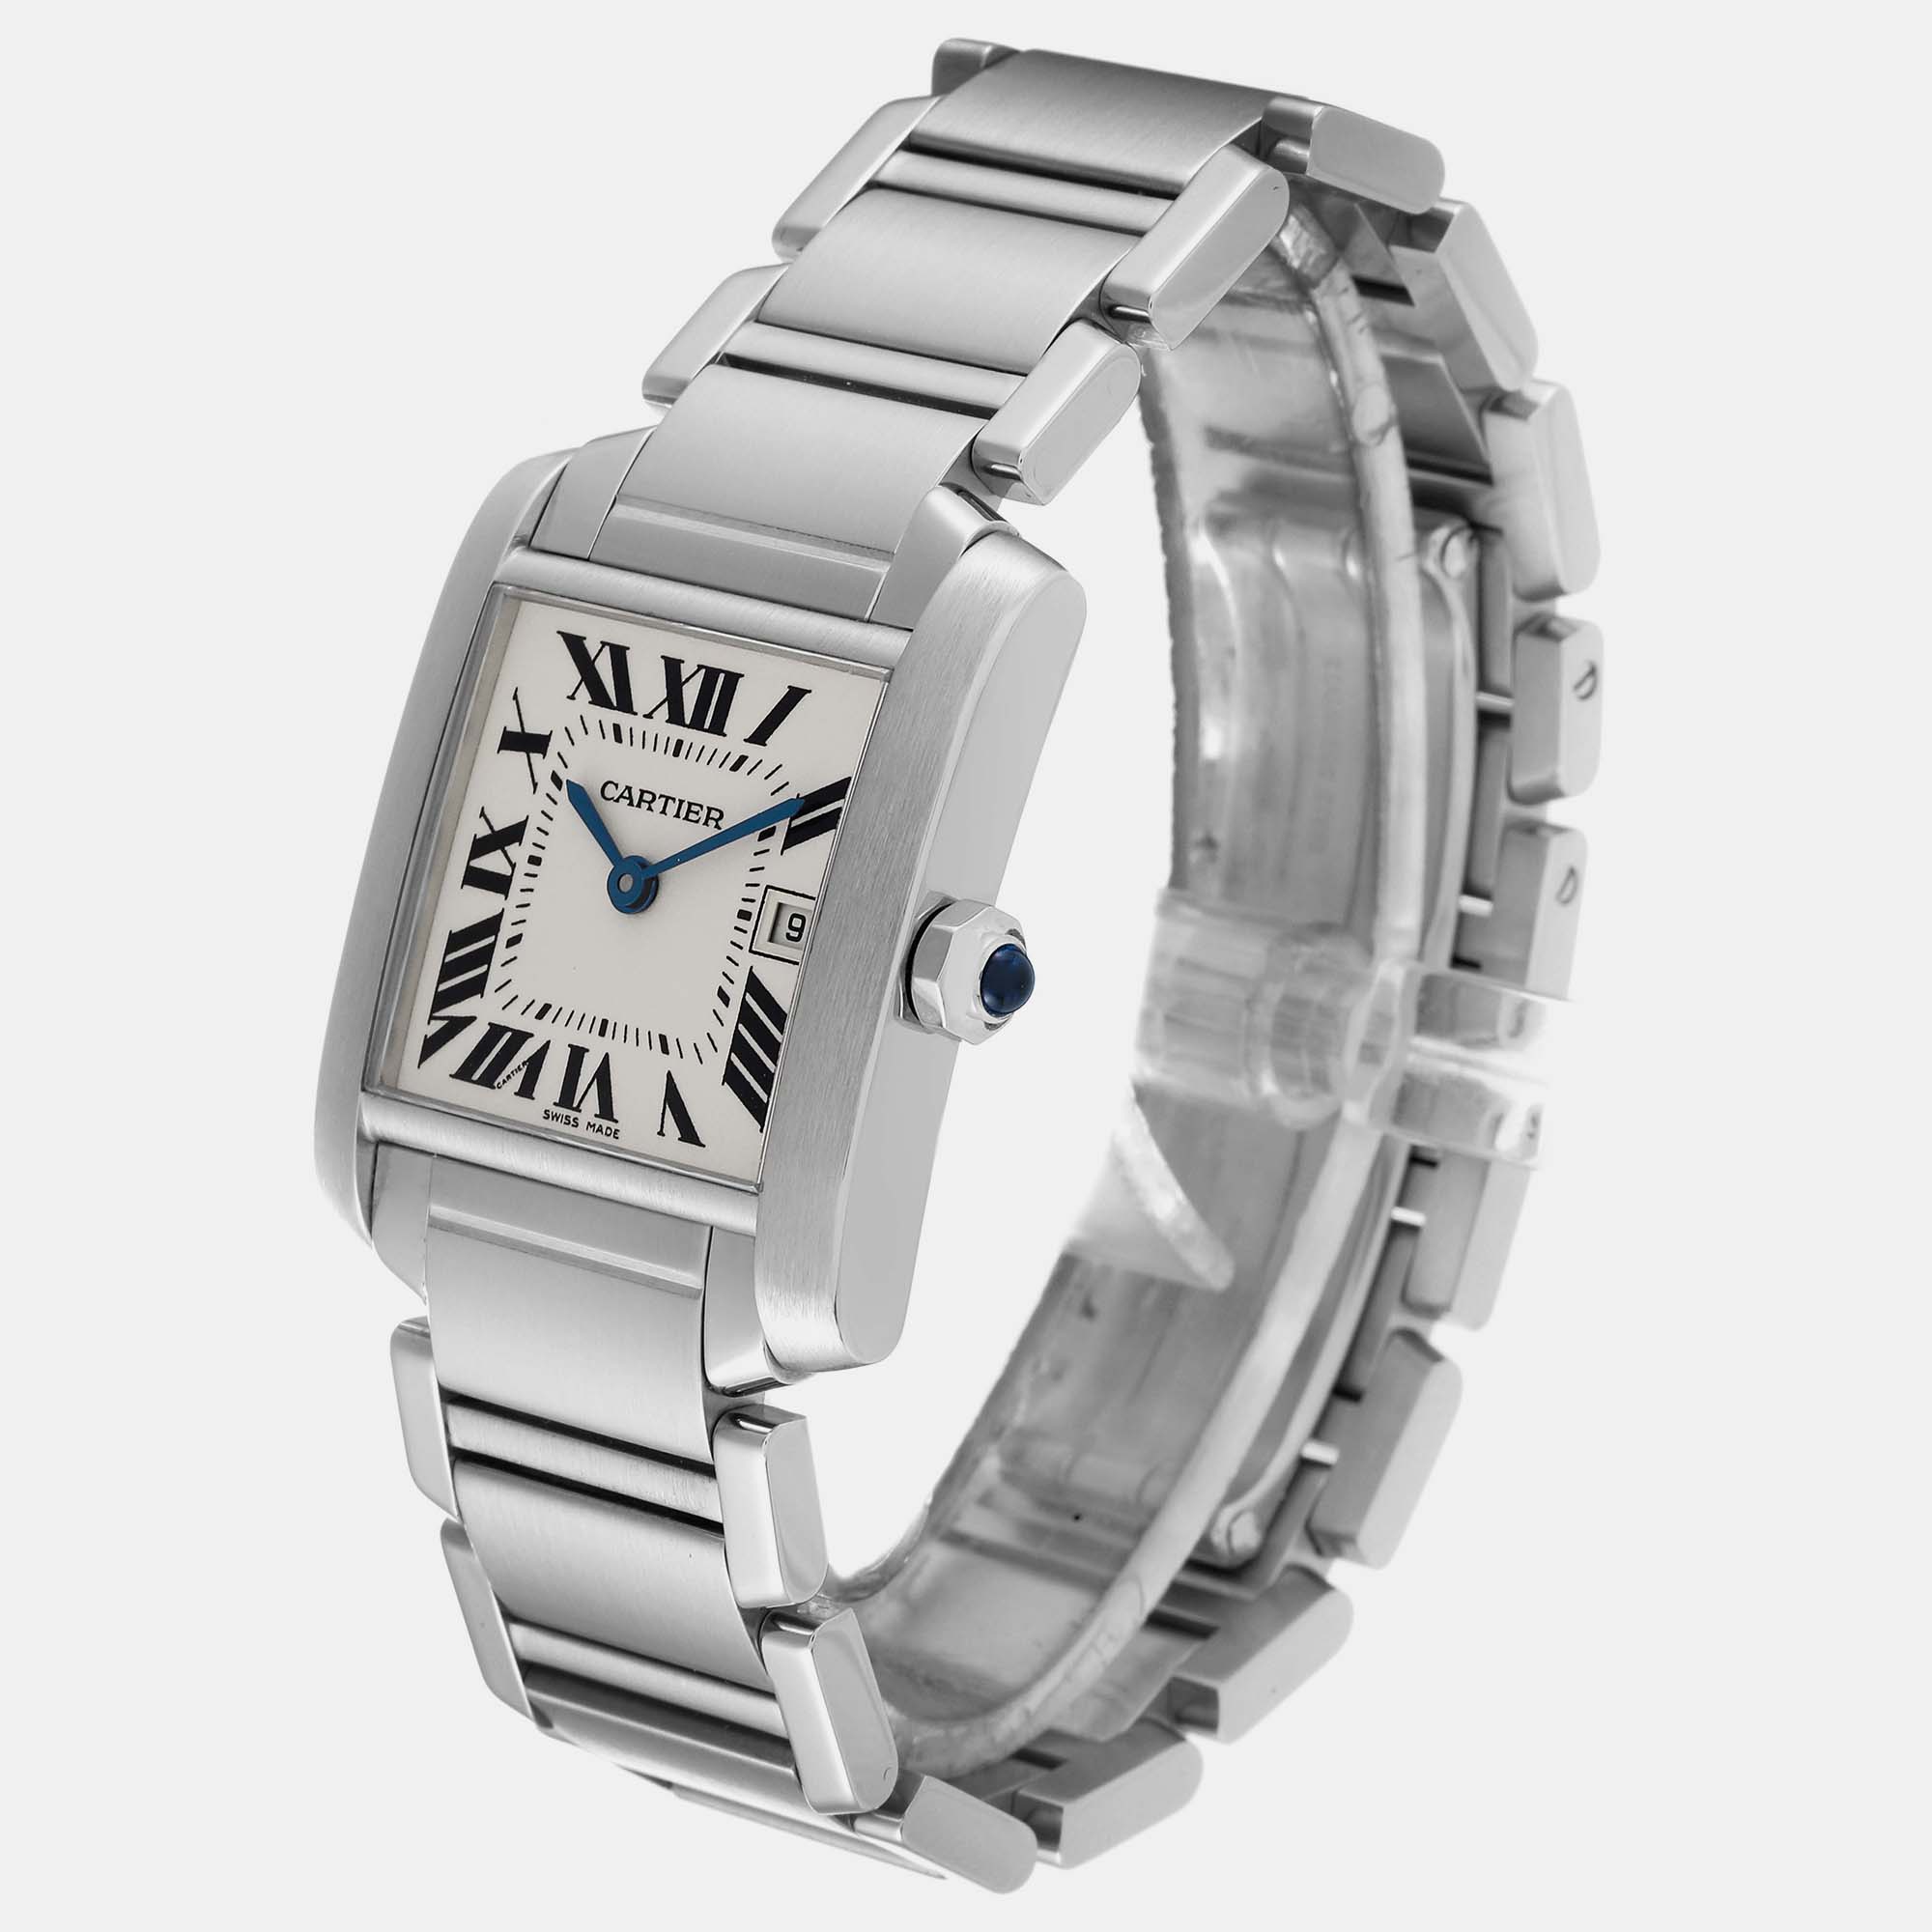 Cartier Tank Francaise Midsize Silver Dial Steel Ladies Watch W51011Q3 25.0 Mm X 30.0 Mm